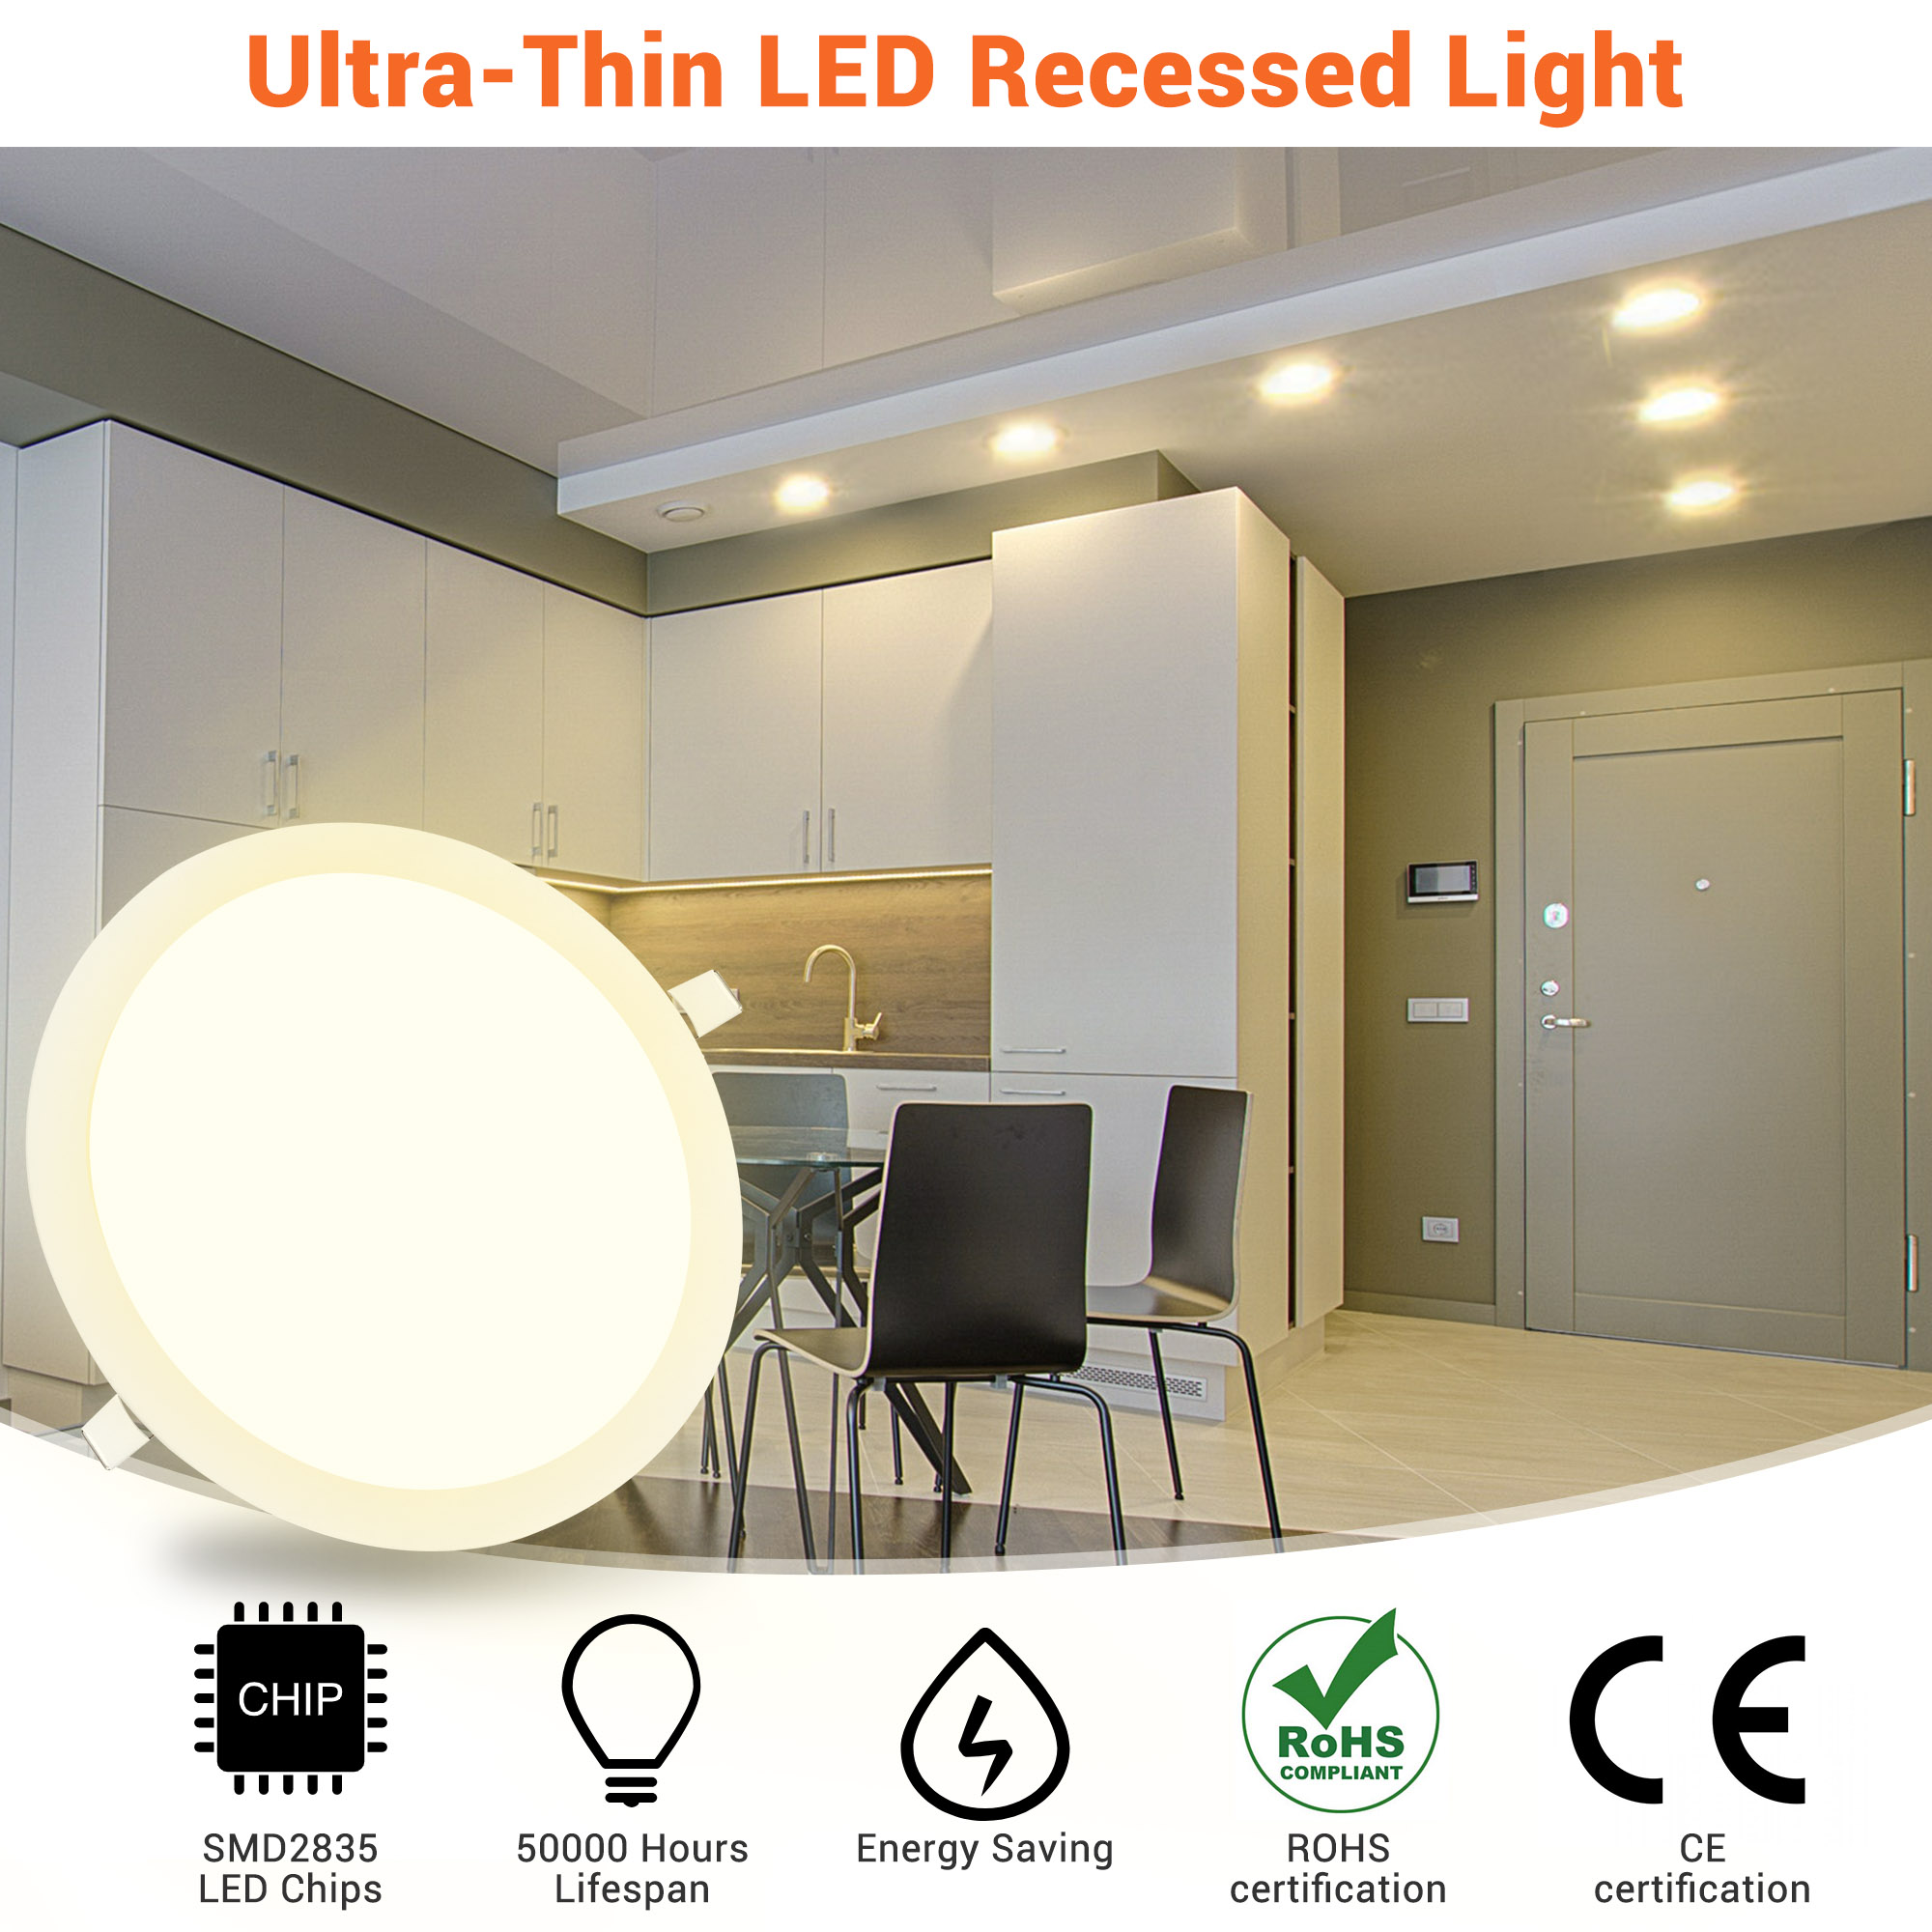 DELight Inch LED Recessed Light Ultra-thin Ceiling Panel 3000K Wafer Downlight  12W Eqv 100W Warm White 960LM Brightness ROHS Certified